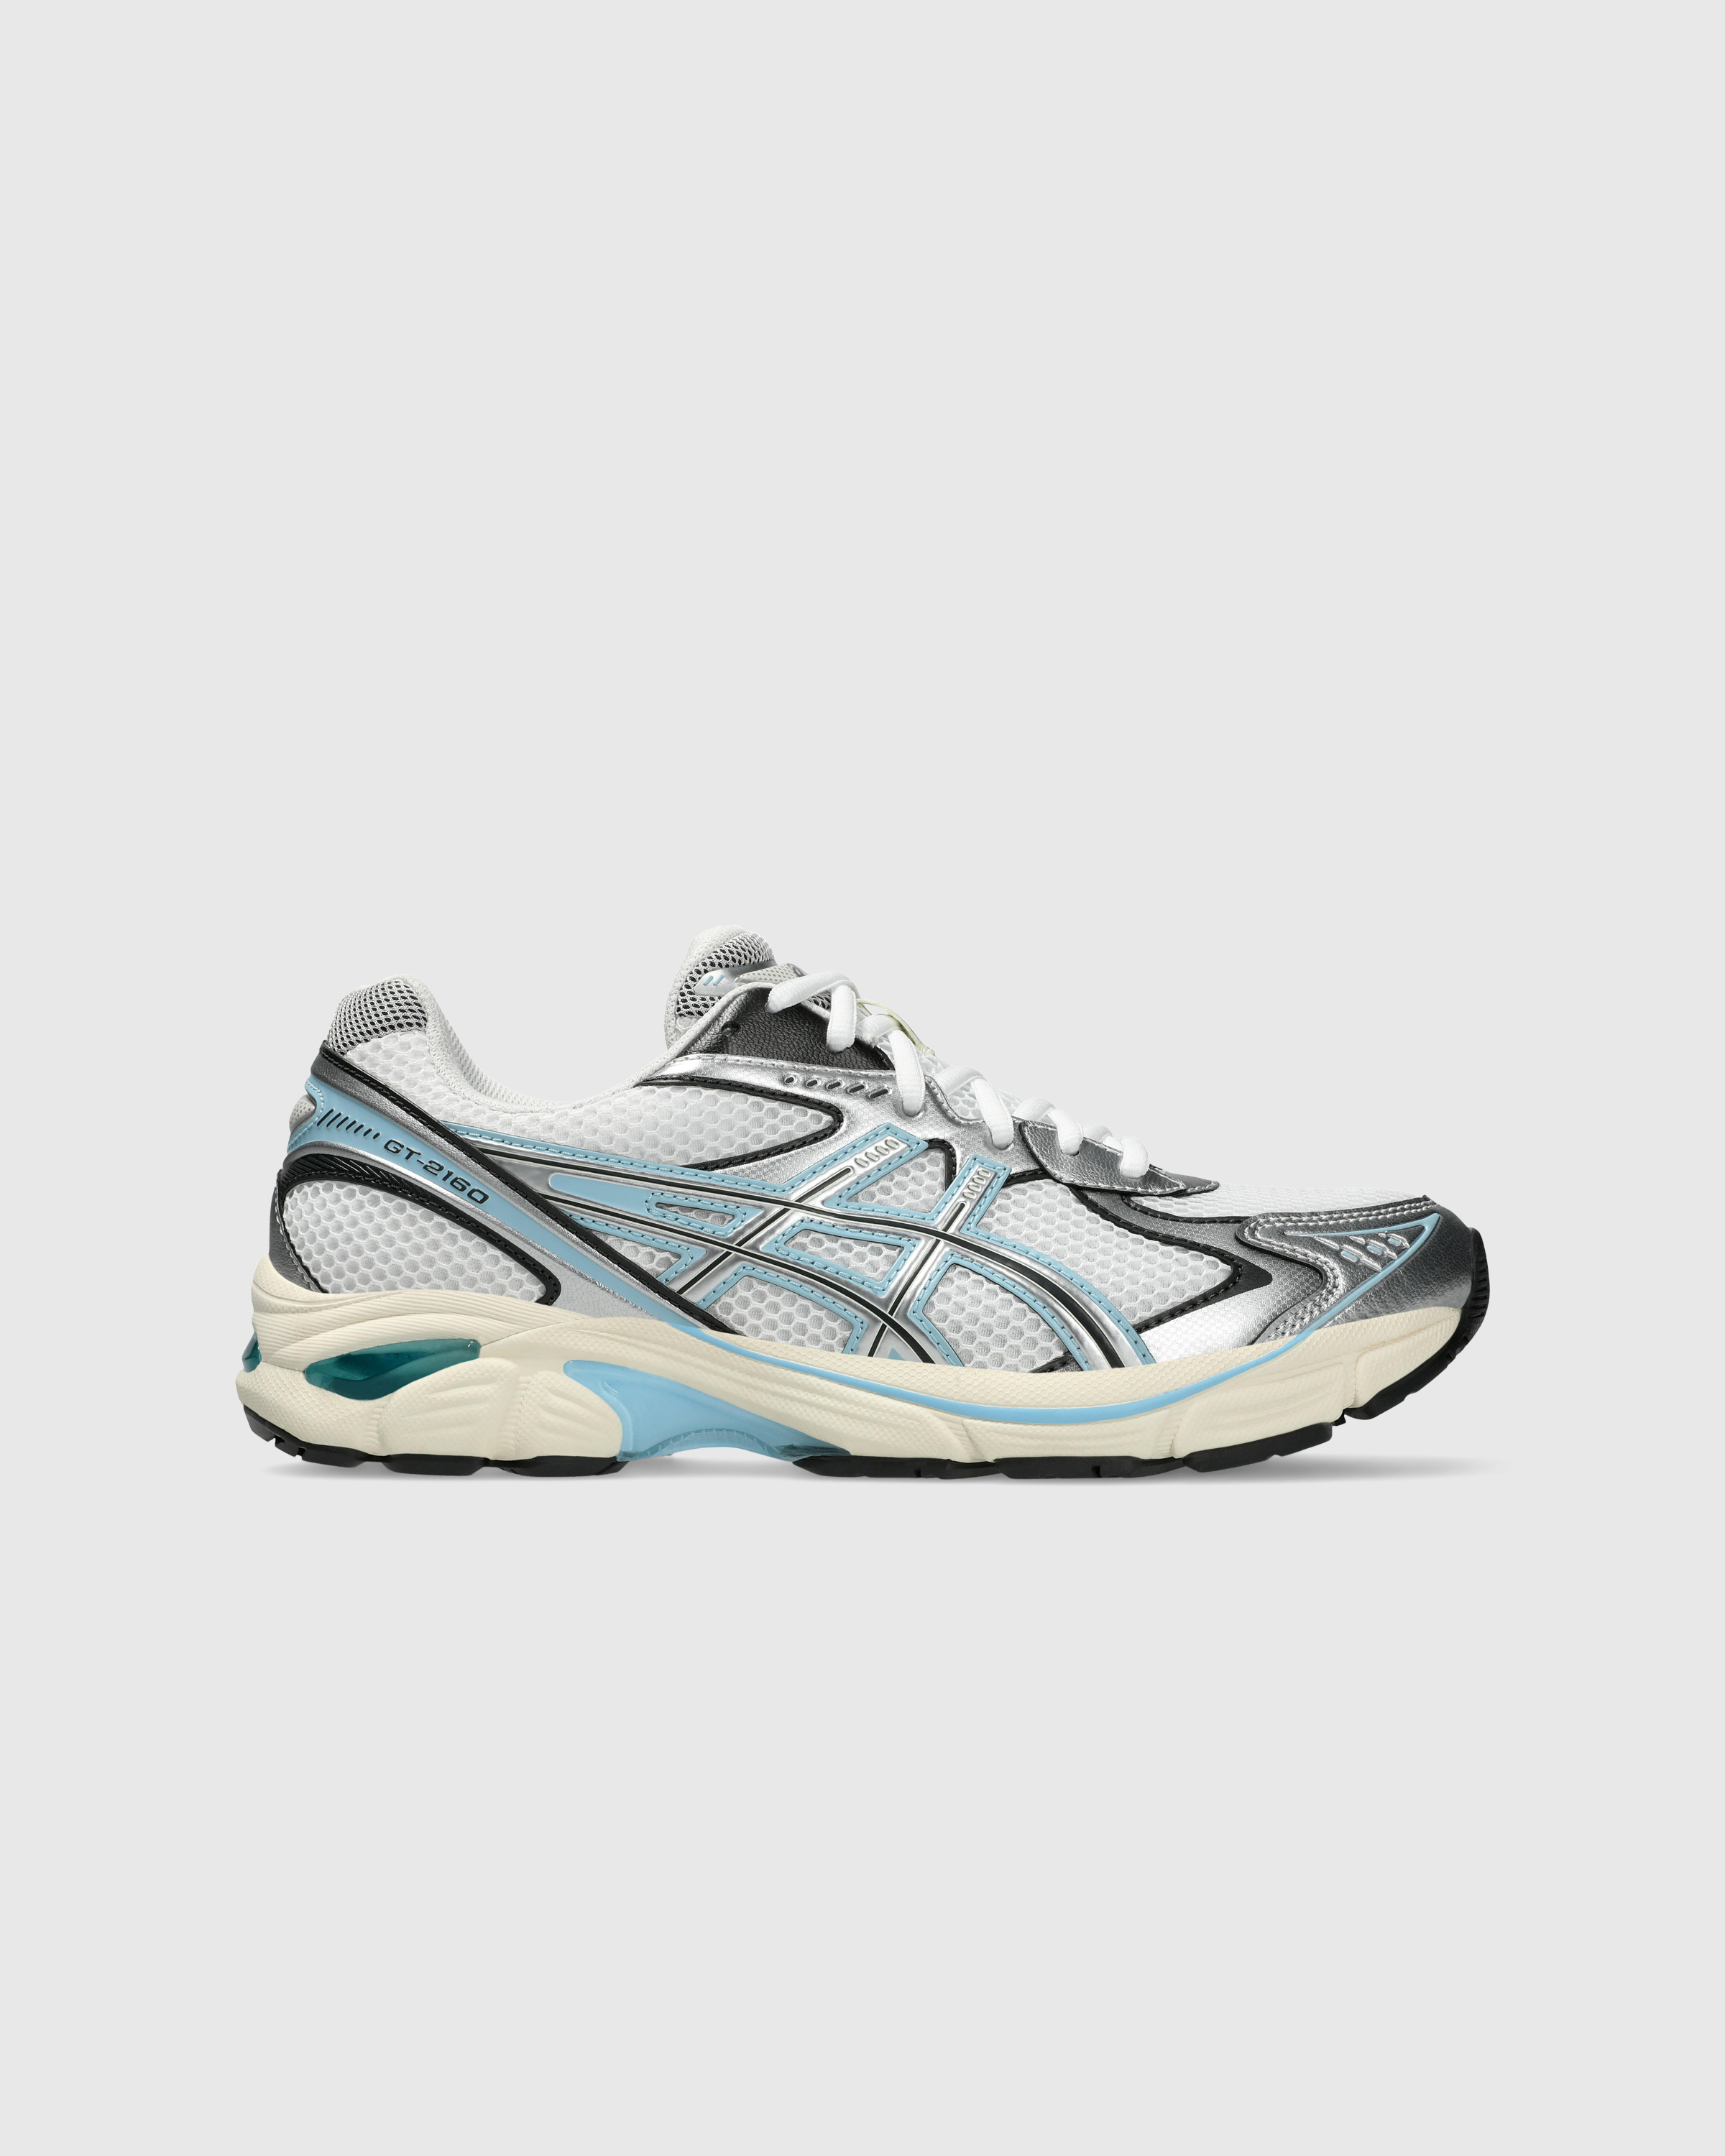 asics – GT-2160 White/Pure Silver - Low Top Sneakers - White - Image 1